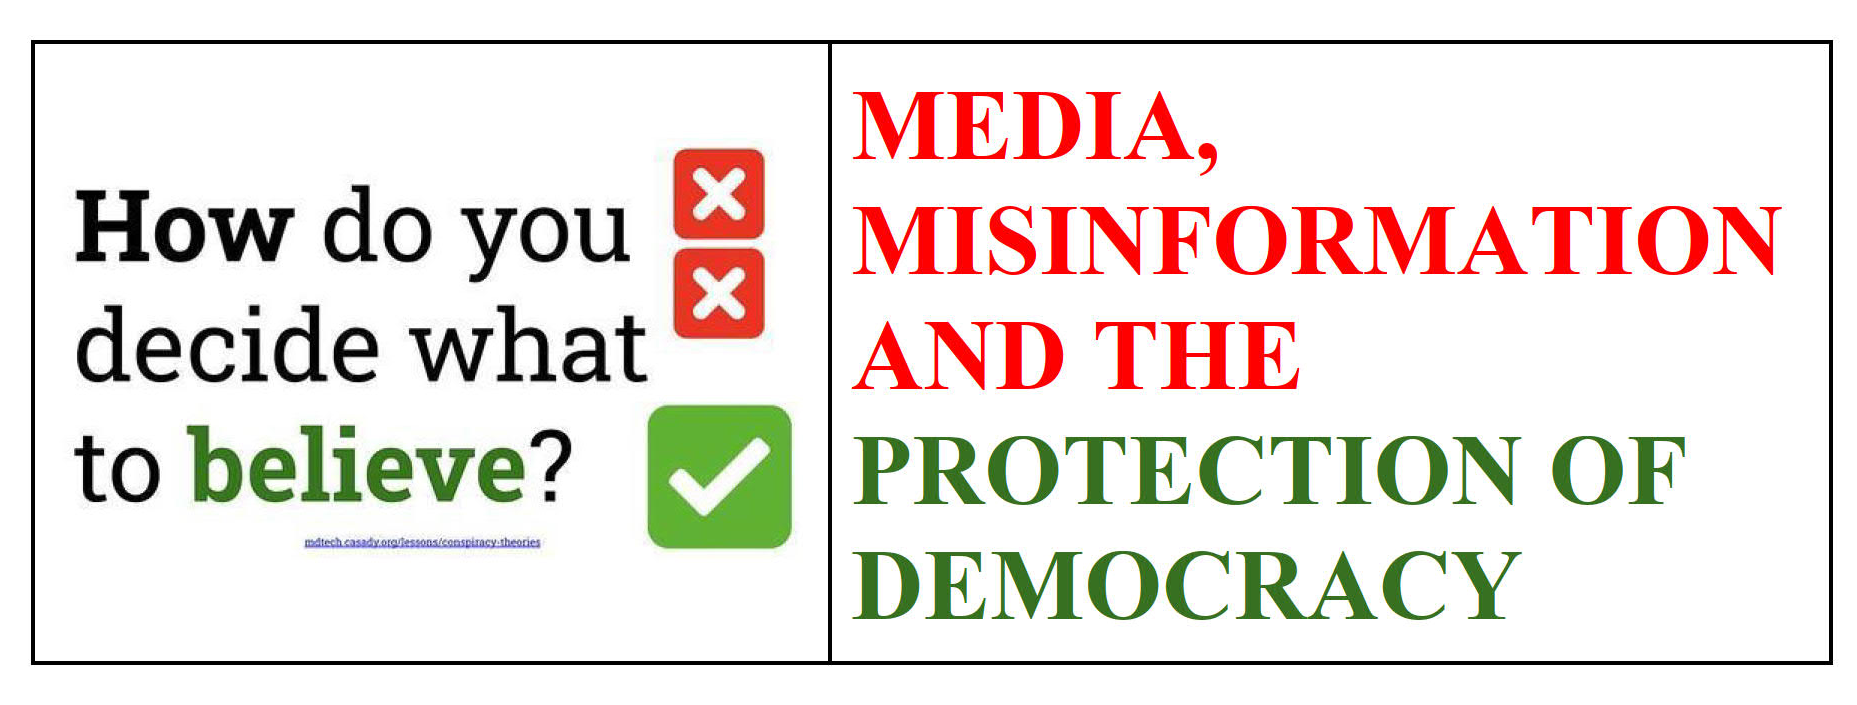 How do you decide what to believe? Media, Misinformation, and the Protection of Democracy